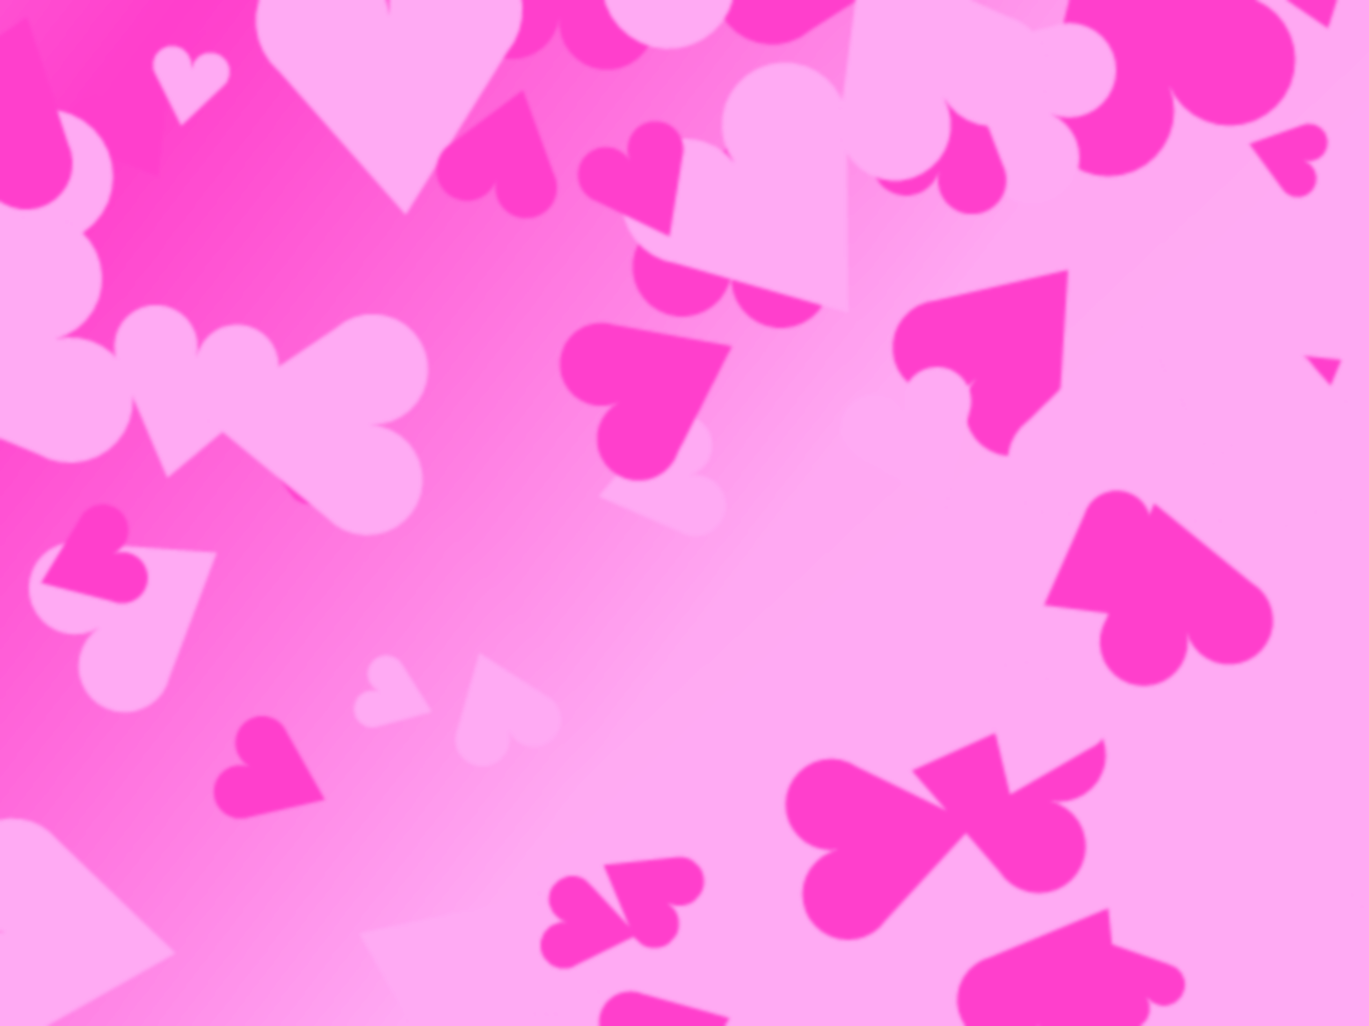 Pink Love Heart Wallpaper Image Amp Pictures Becuo